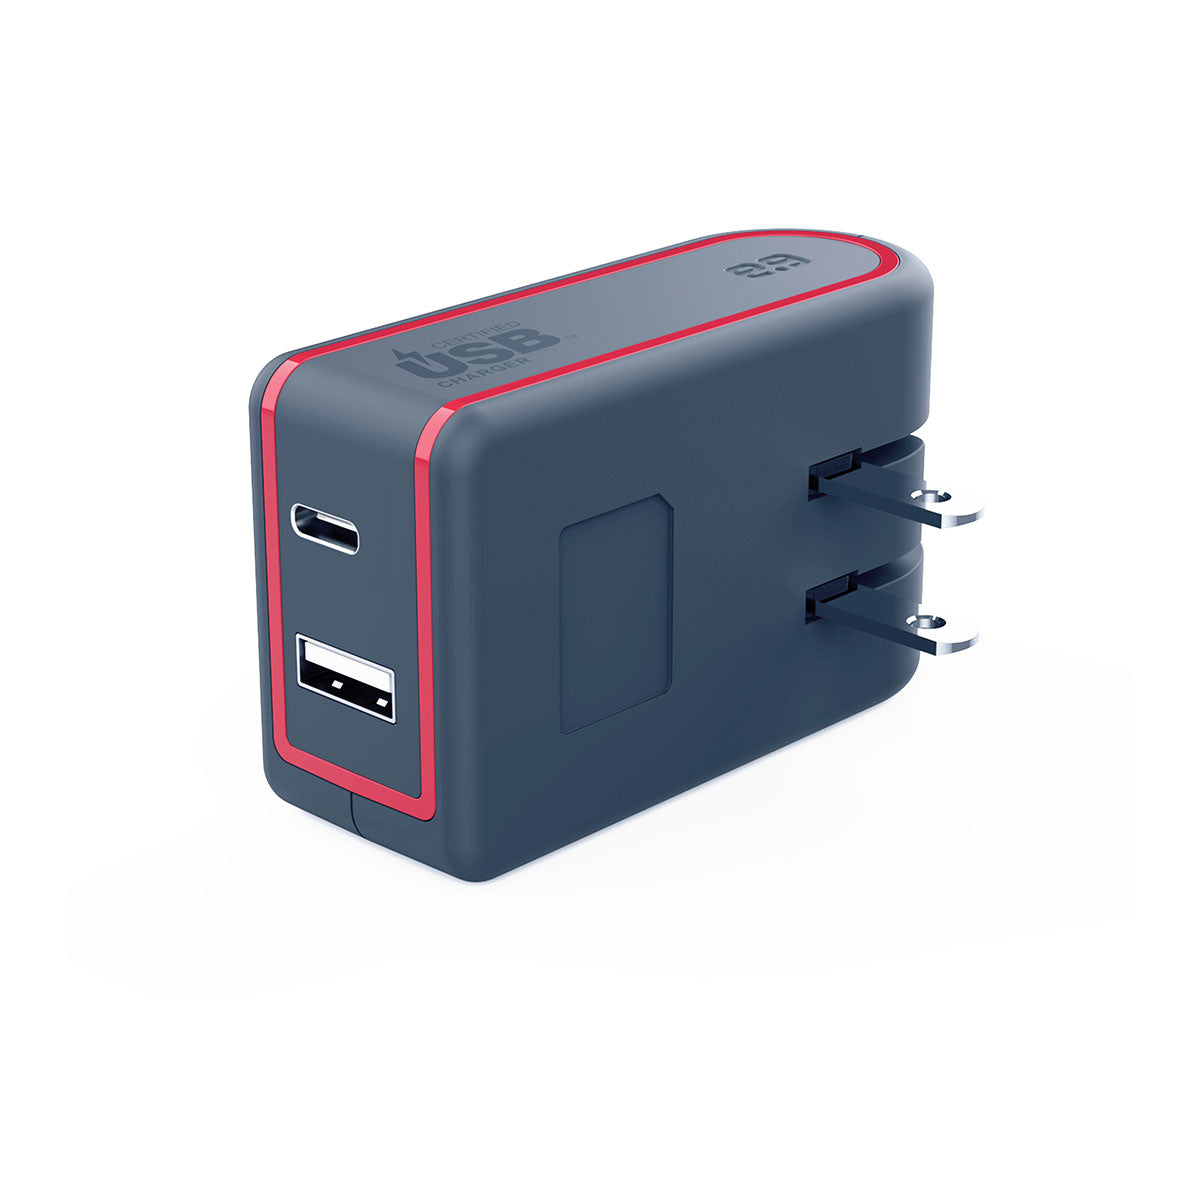 Puregear Universal 57W Dual USB A+PD 2.0 Wall Charger - Gray/Red